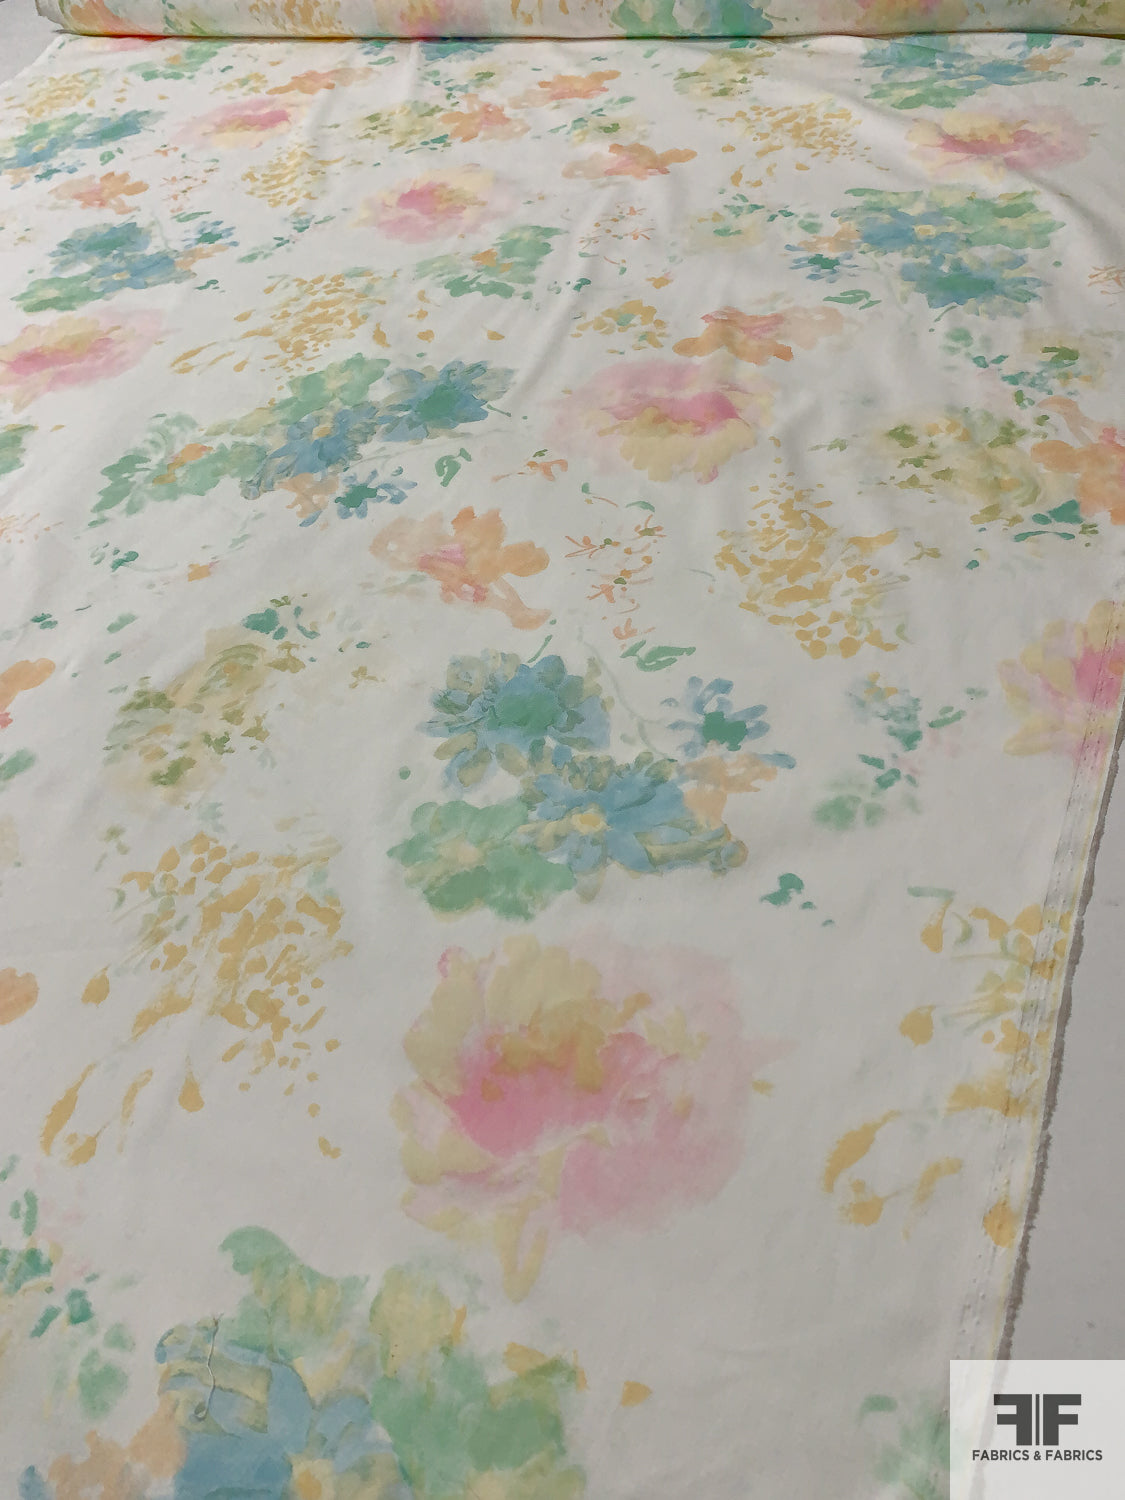 Watercolor Floral Printed Stretch Brushed Cotton Twill - Pastel Green / Pink / Blue / Orange / Off-White